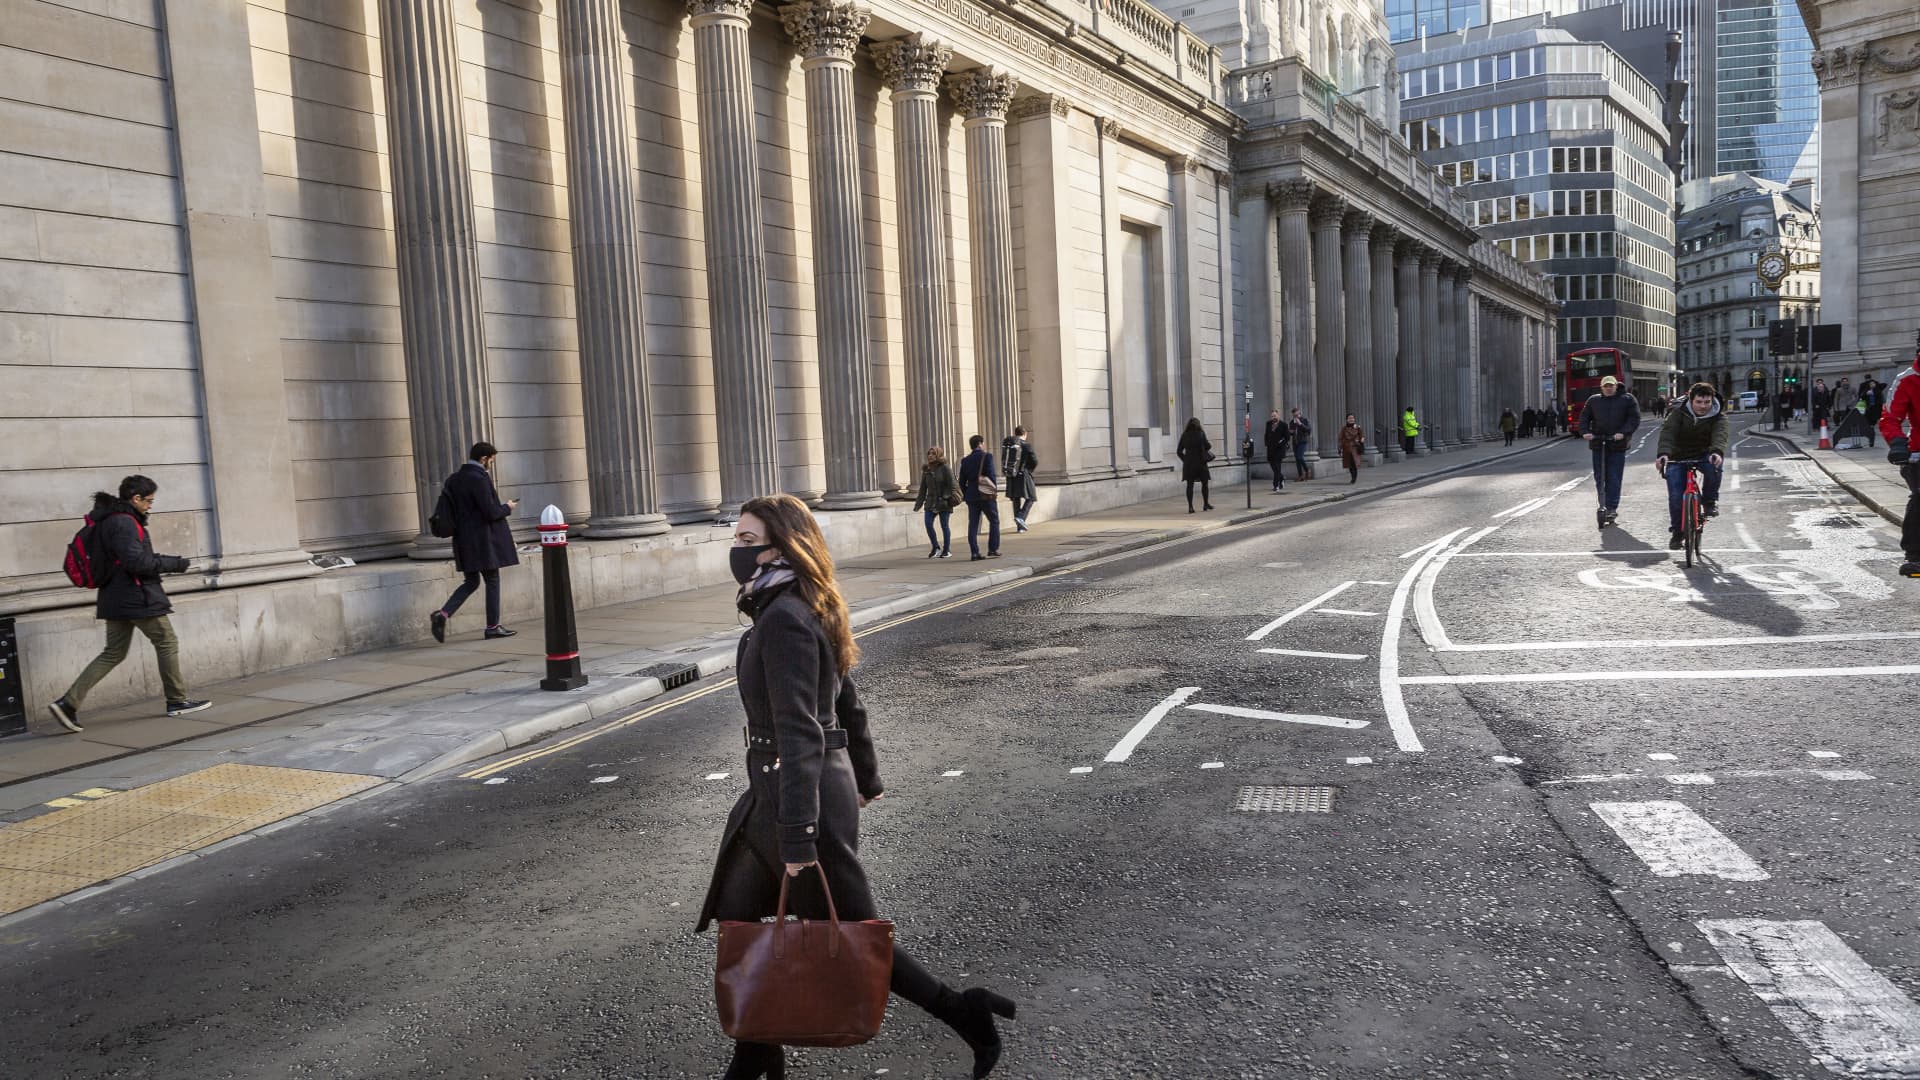 A woman wearing a protective face mask crosses the road in front of the Bank of England in what would normally be the morning rush hour in the City of London on March 17th, 2020. The financial district of the UK is unusually quiet after the government requested people to refrain from all but essential travel and activities yesterday.